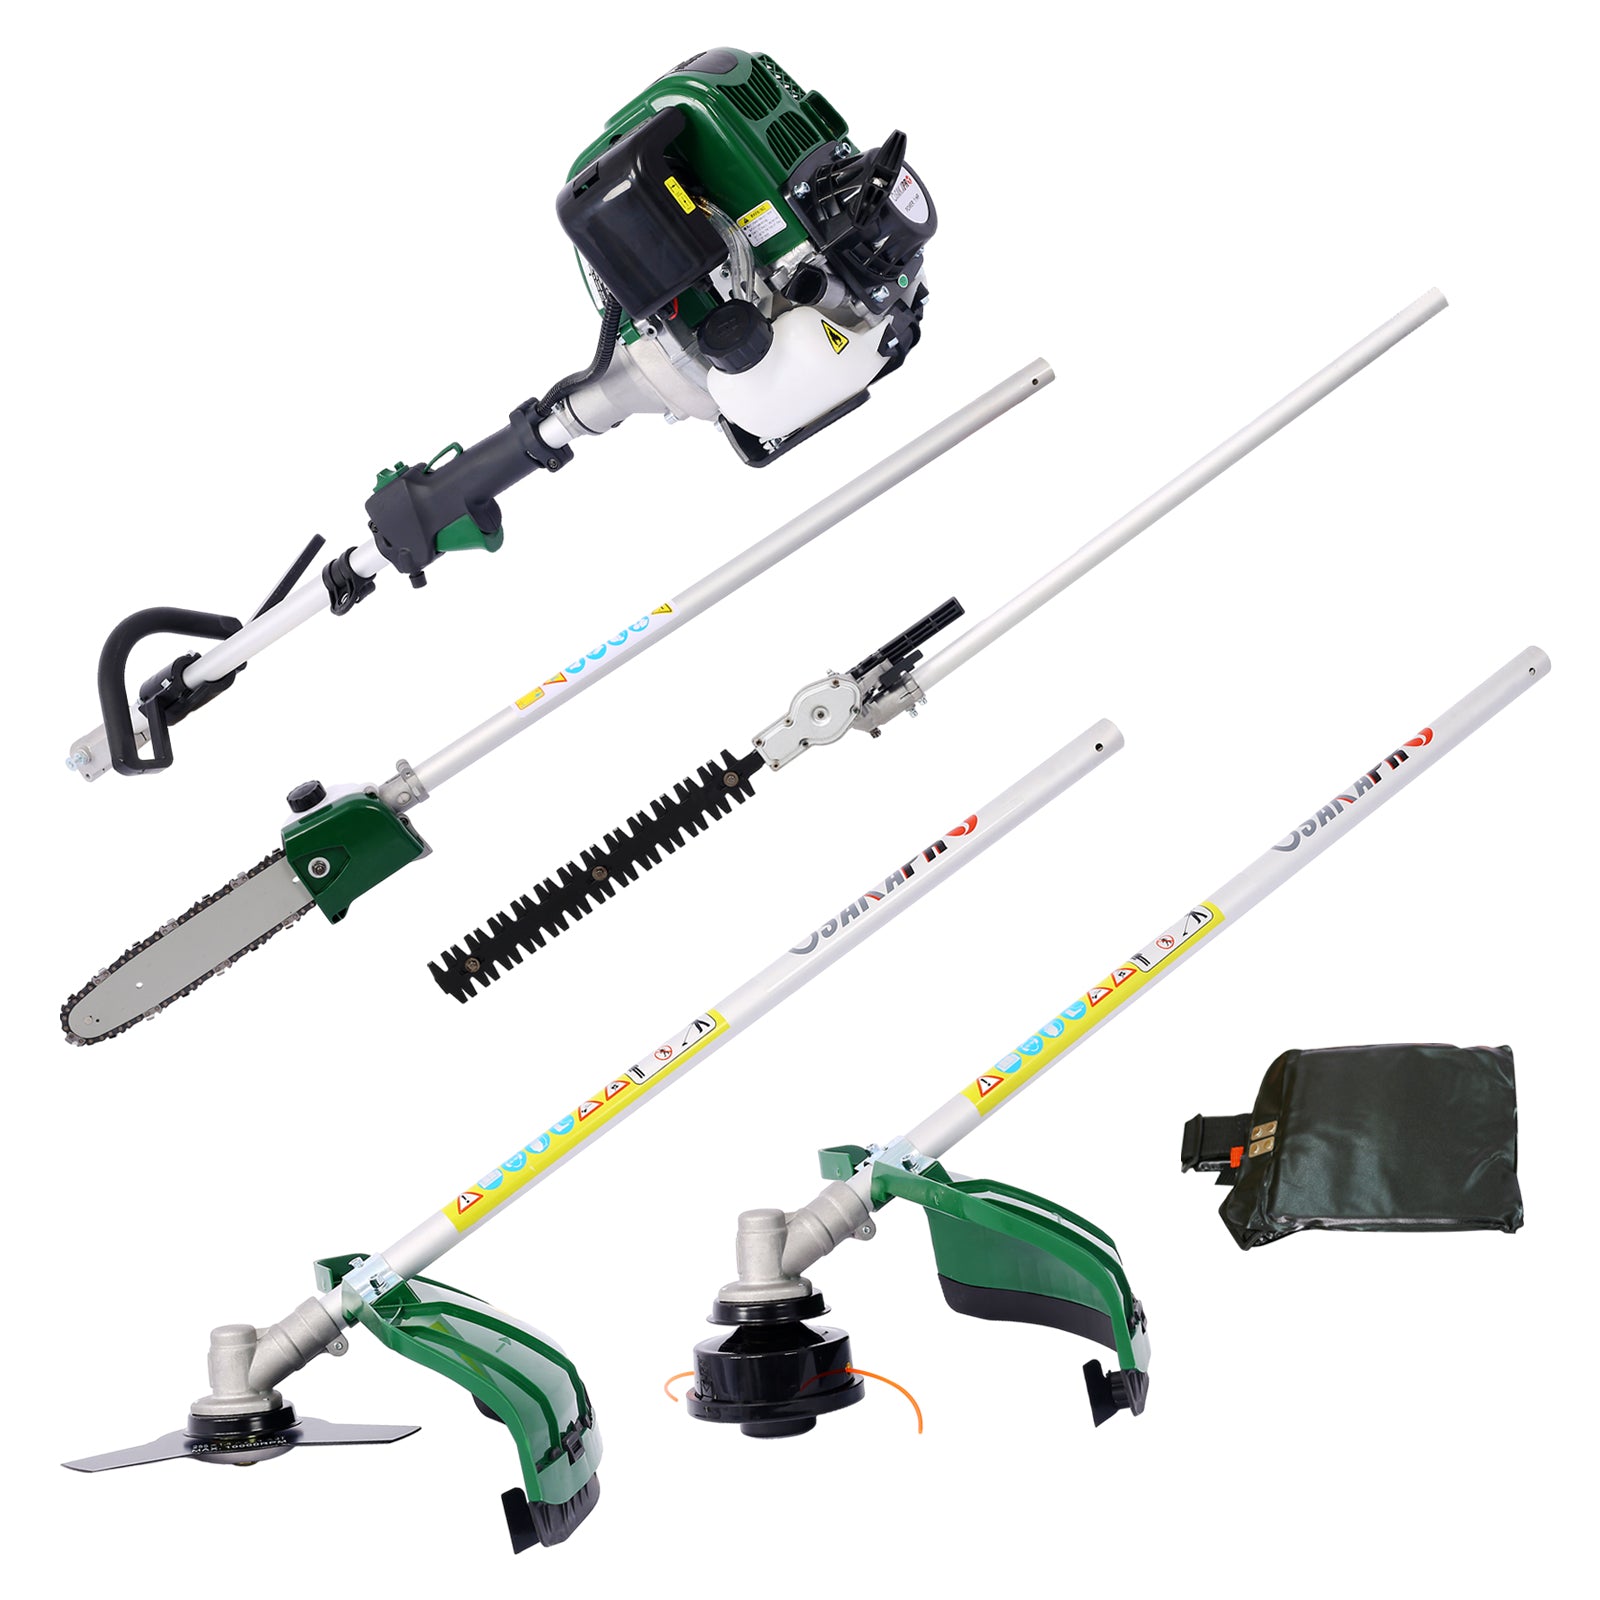 ZNTS 4 in 1 Multi-Functional Trimming Tool, 31CC 4-Cycle Garden Tool System with Gas Pole Saw, Hedge W46561886